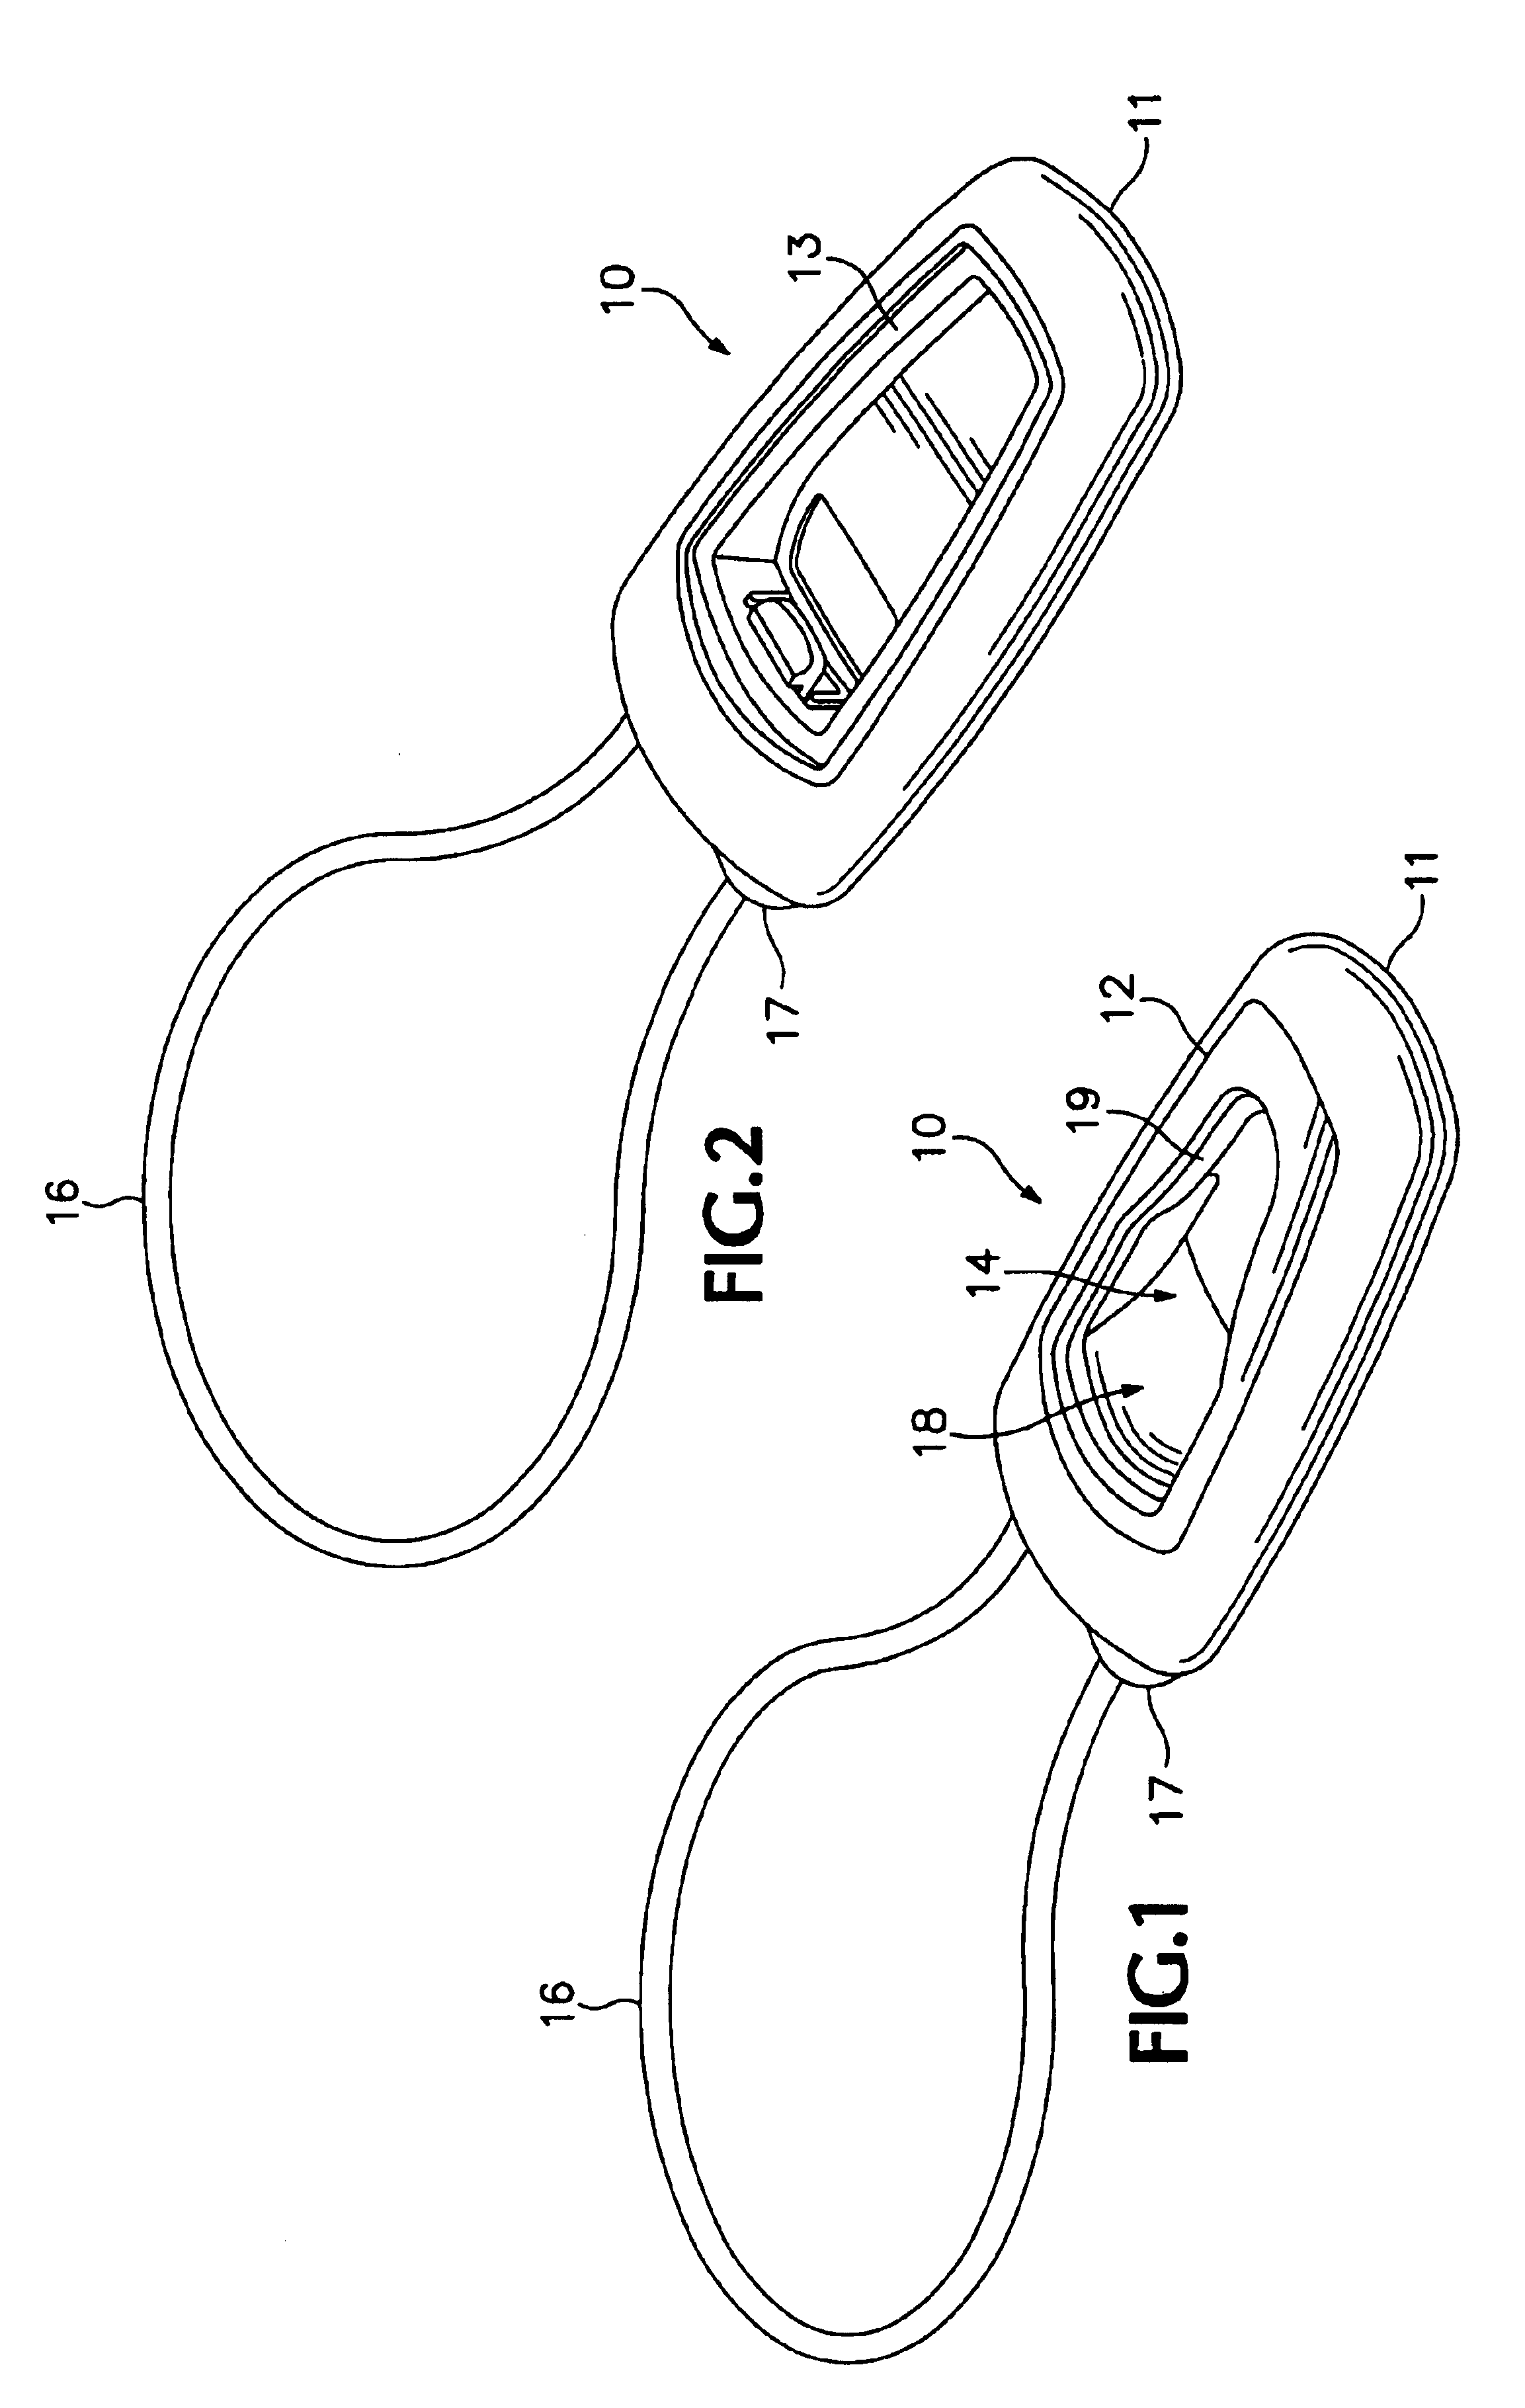 Attachment device for a mobile phone or the like